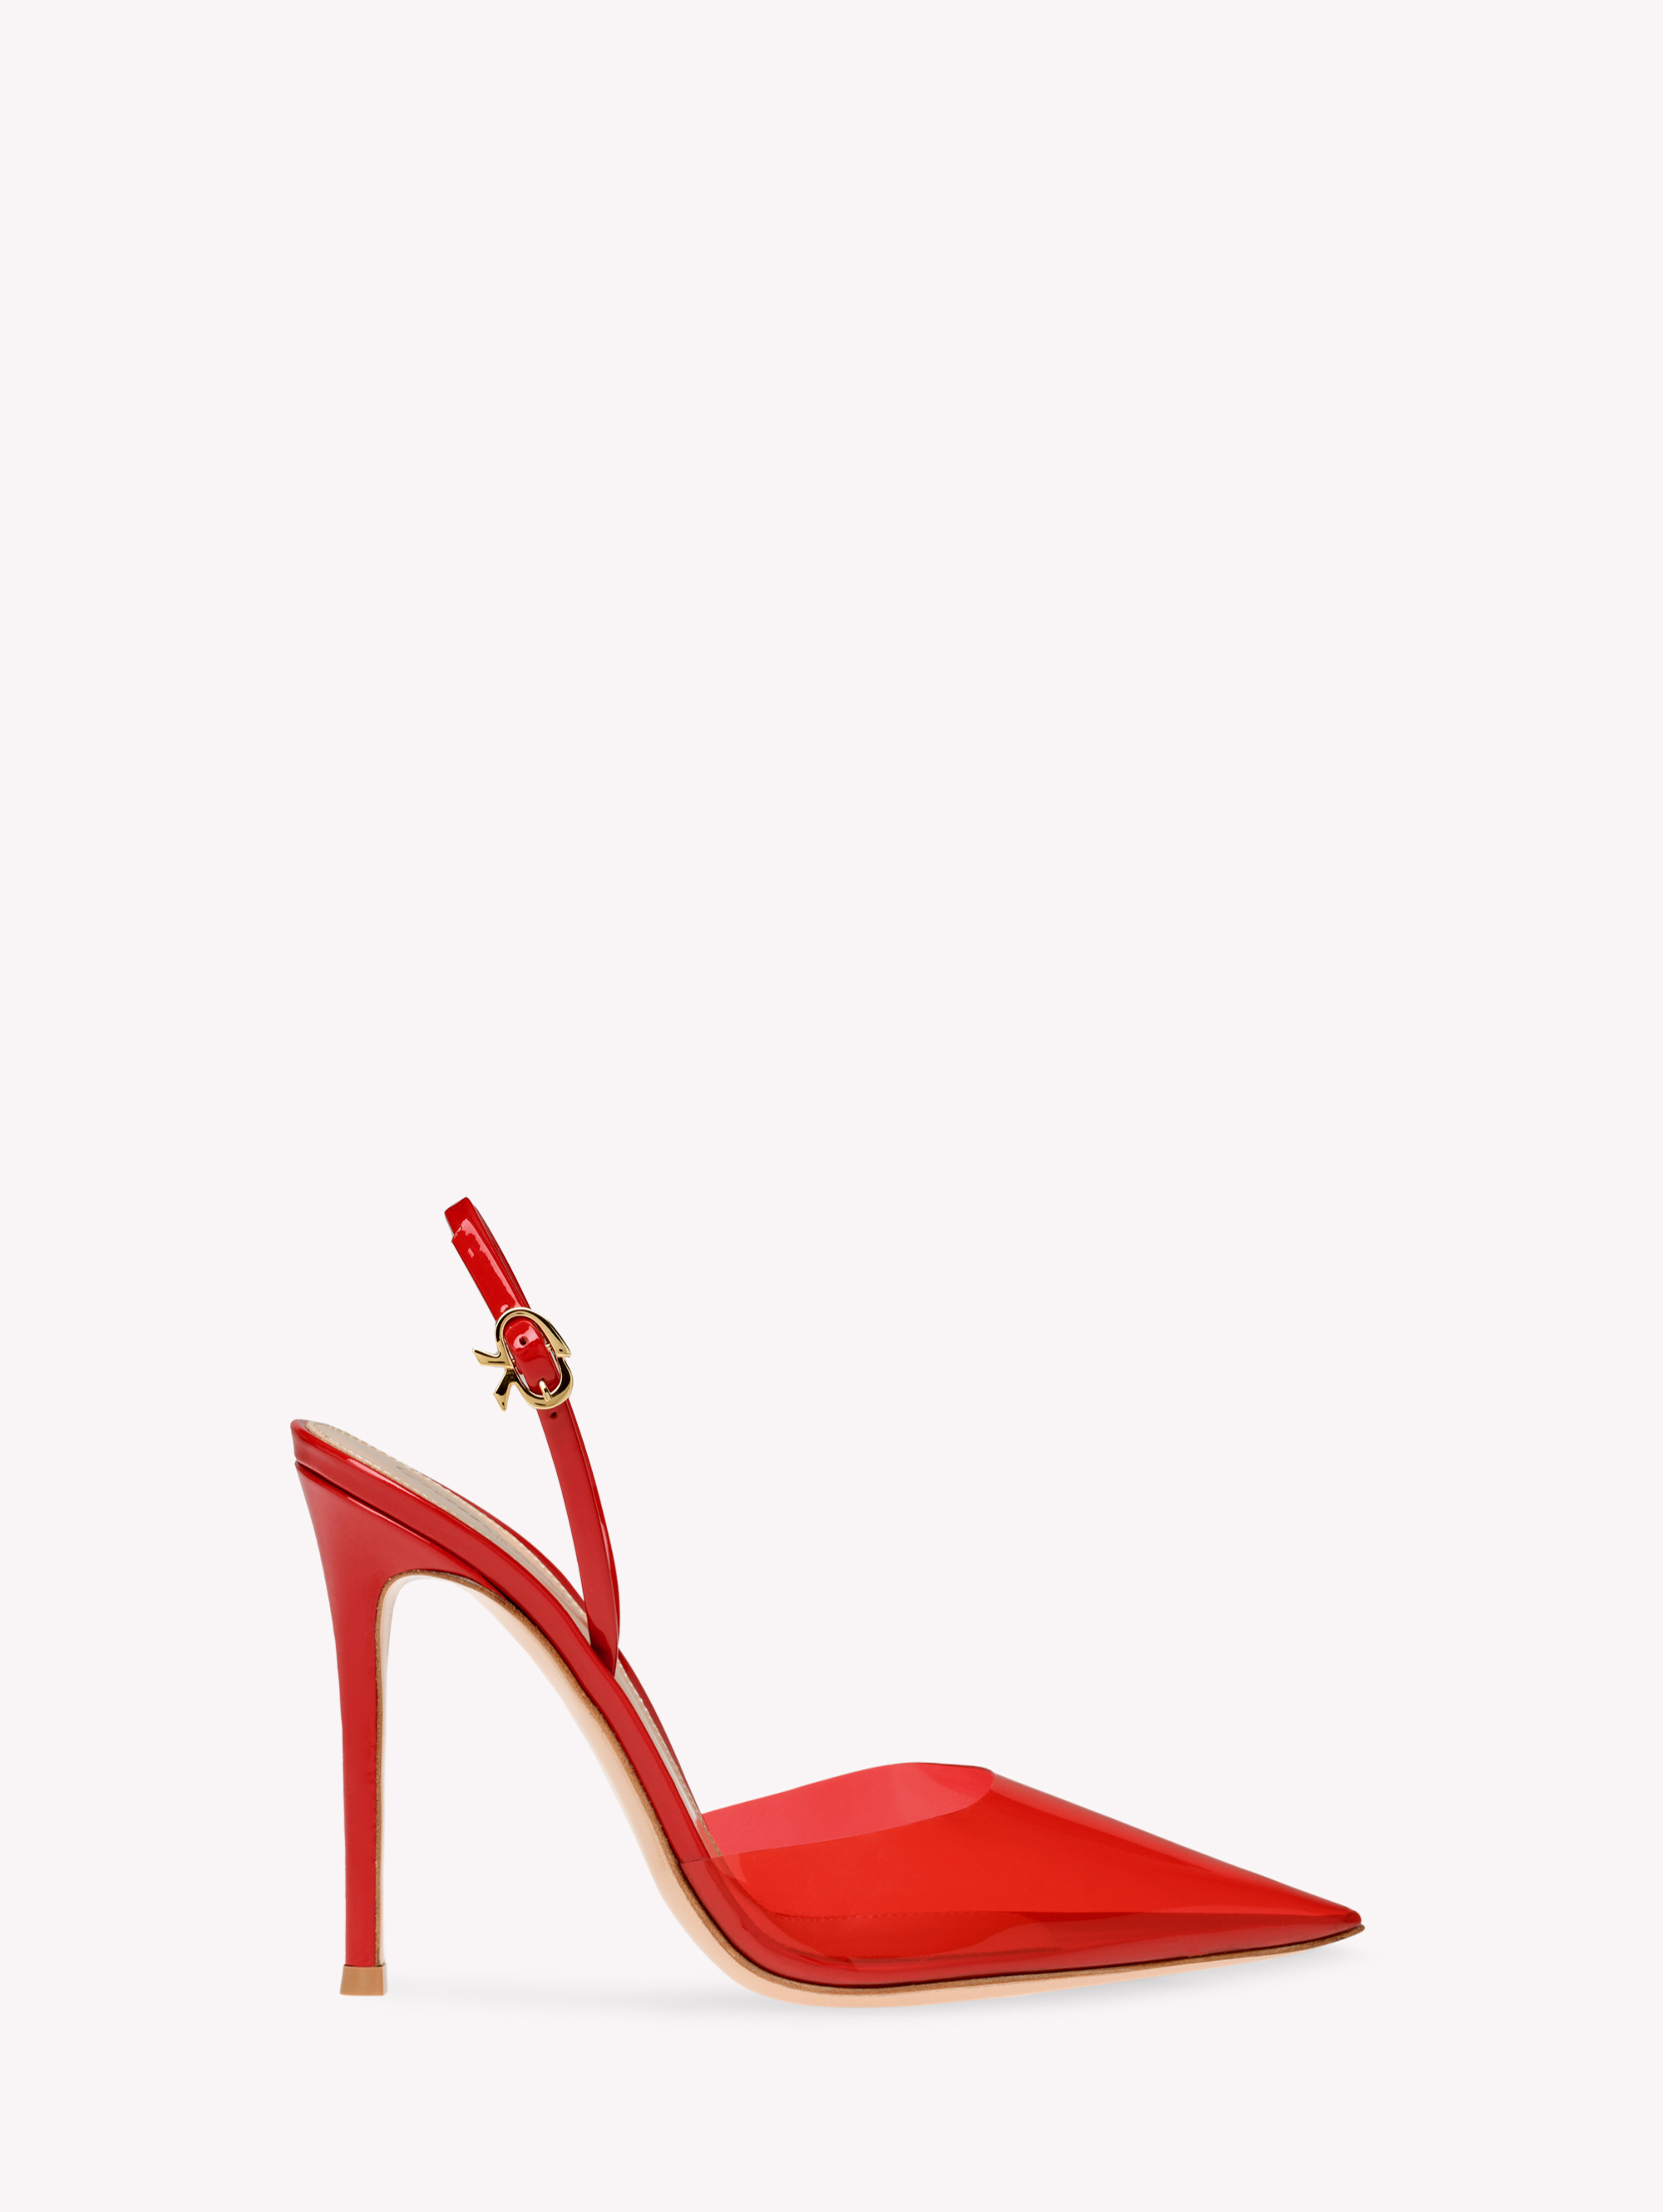 Buy RIBBON D'ORSAY for USD 895.00 | Gianvito Rossi United States